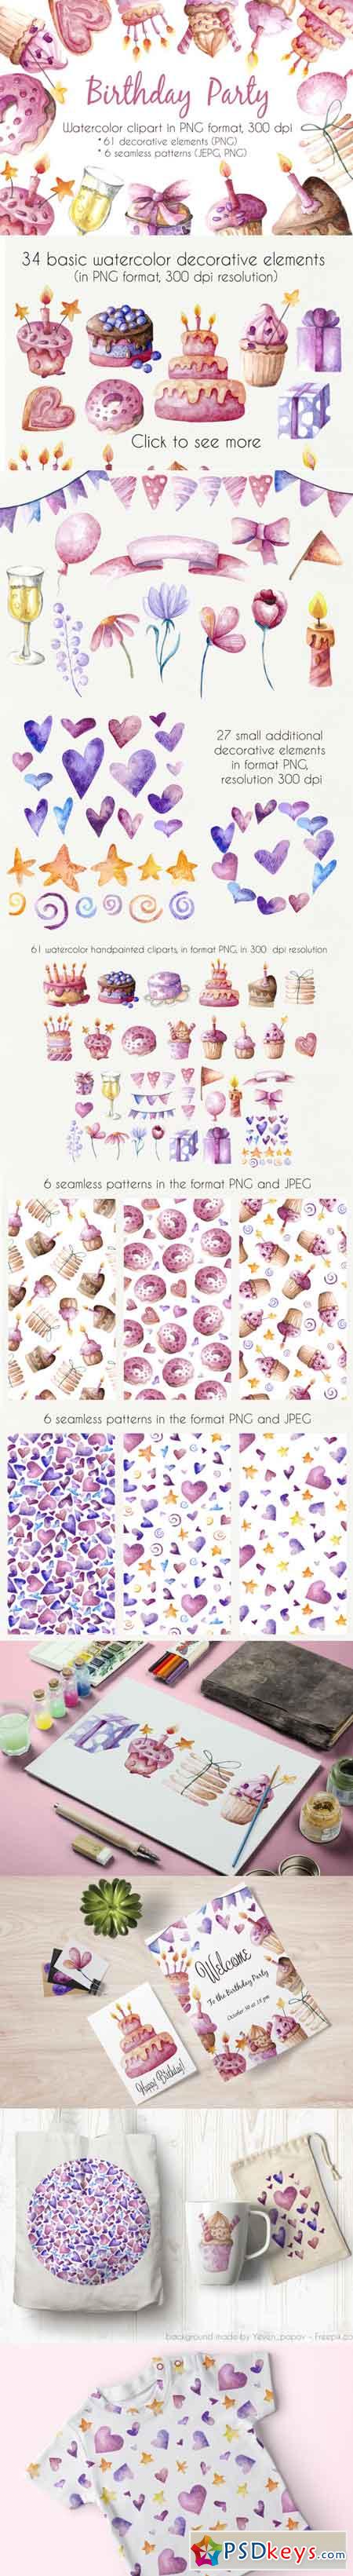 Birthday Party - watercolor clipart 3483955